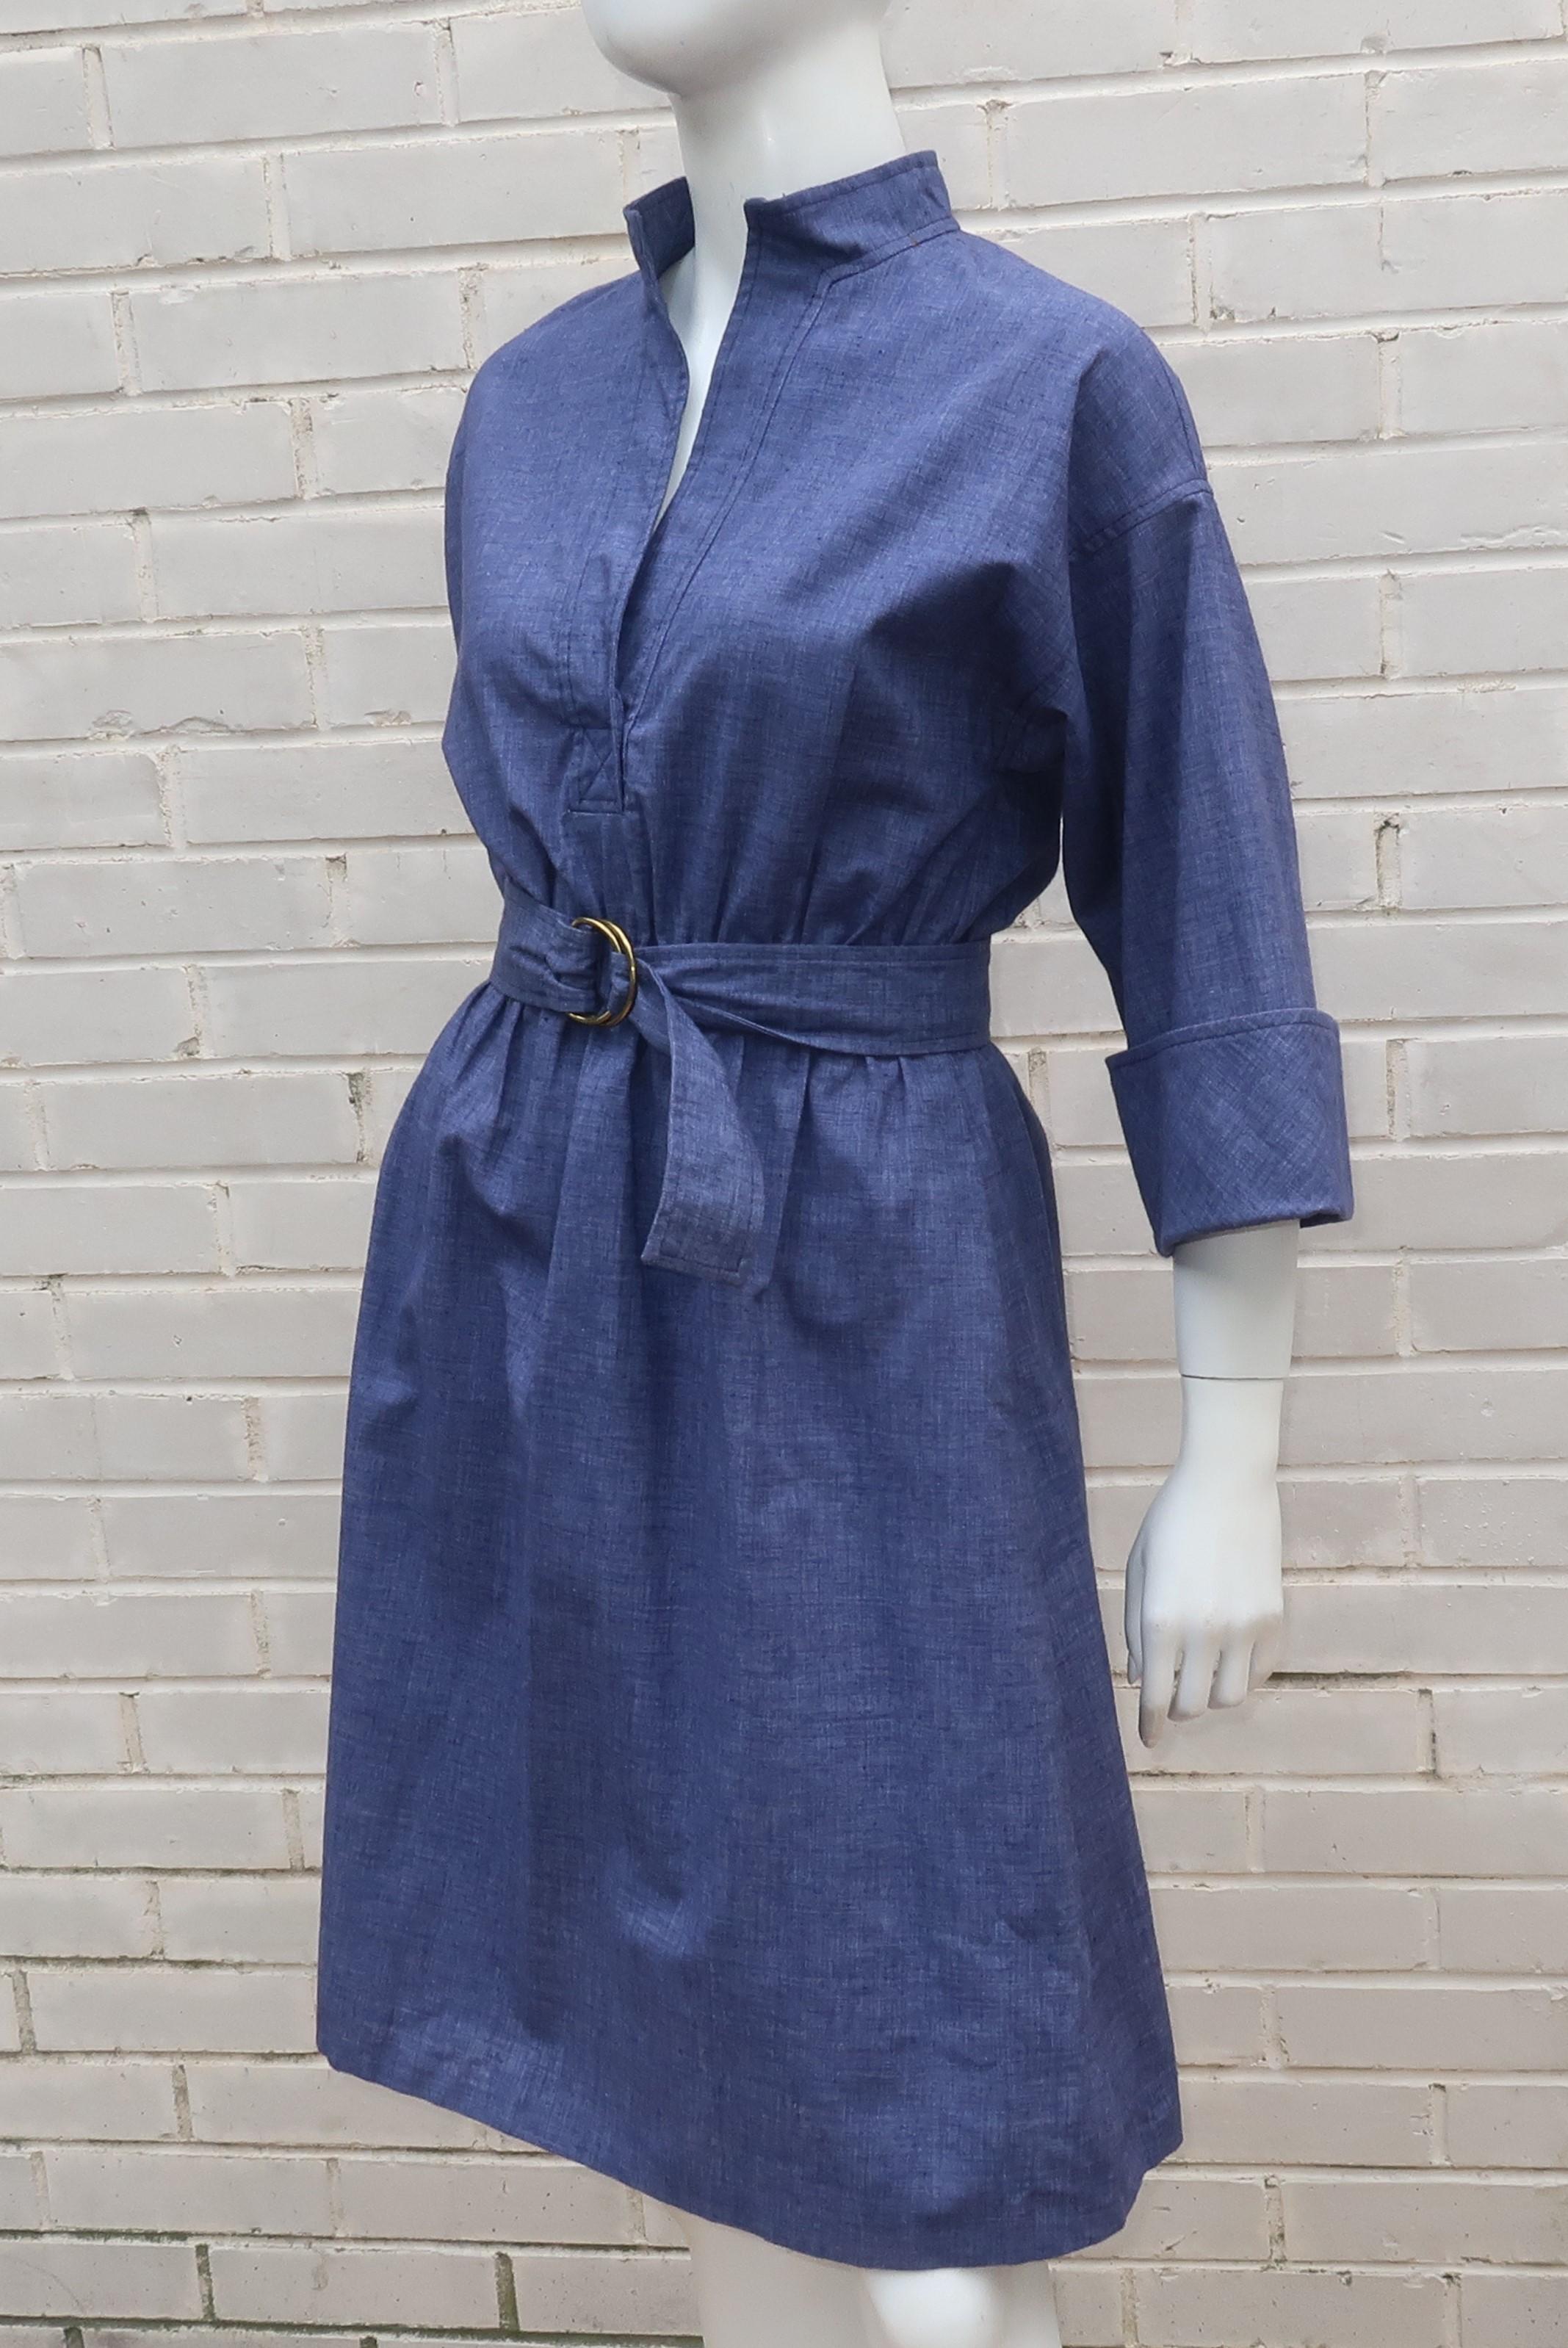 Saks Fifth Avenue Young Dimensions Denim Dress, 1970’s 1